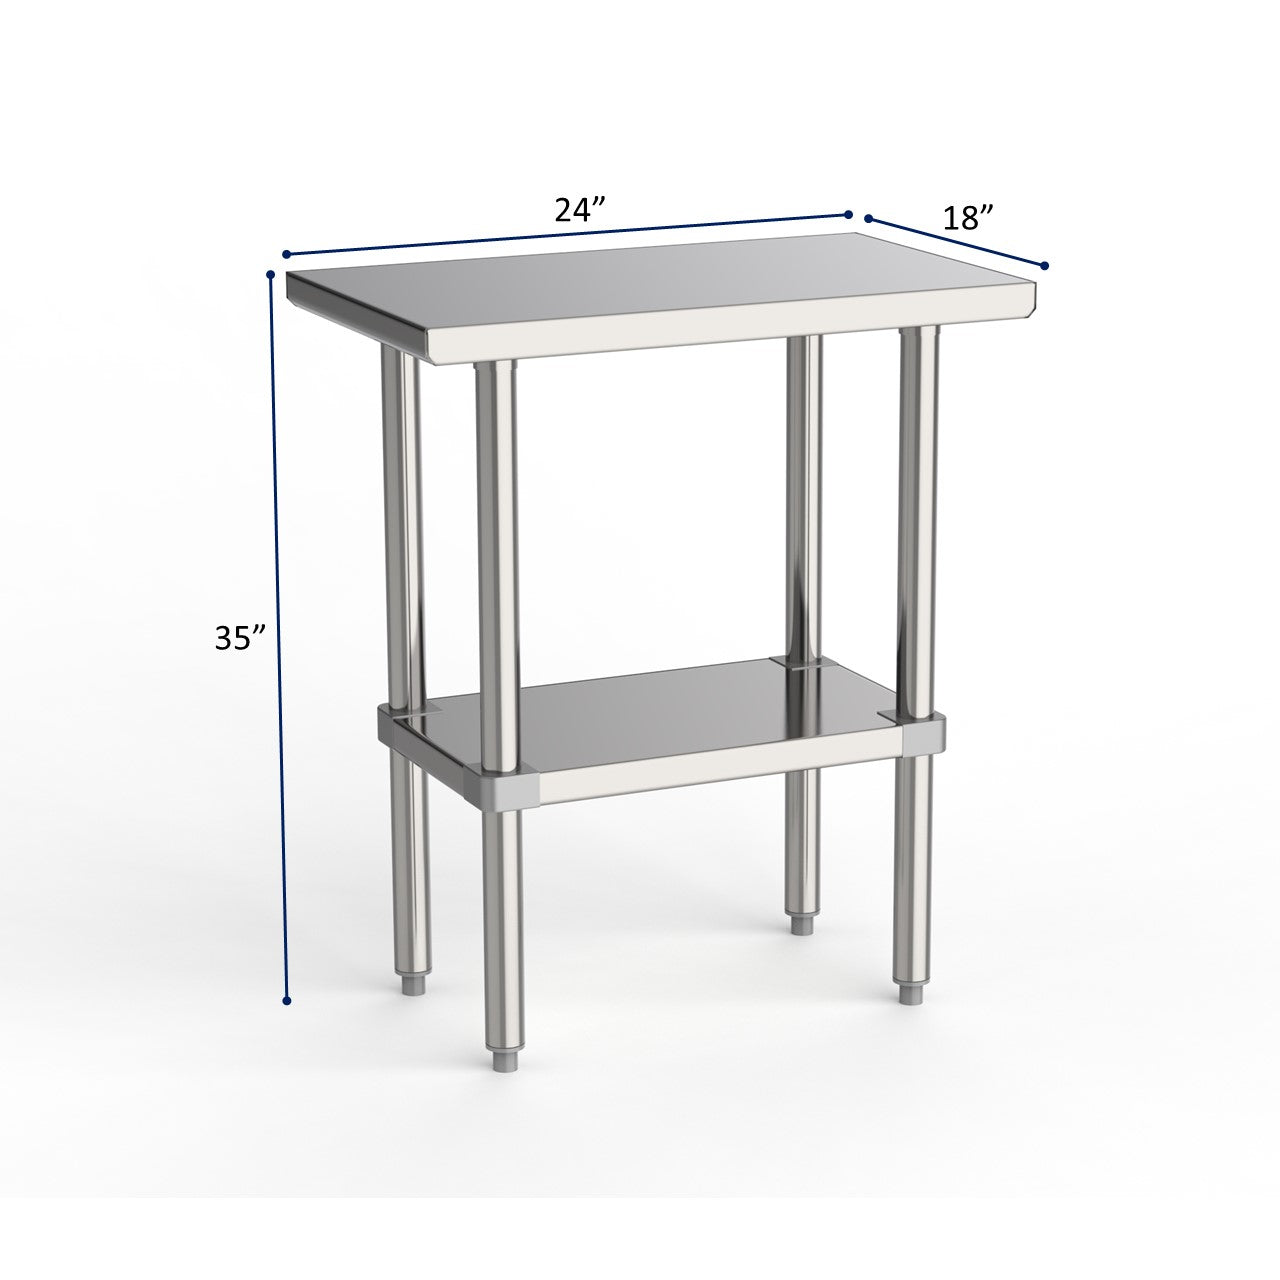 GSW Commercial Grade Flat Top Work Table with Stainless Steel Top, Galvanized Undershelf & Legs, Adjustable Bullet Feet, Perfect for Restaurant, Home, Office, Kitchen or Garage, NSF Approved (24"D x 18"L x 35"H)